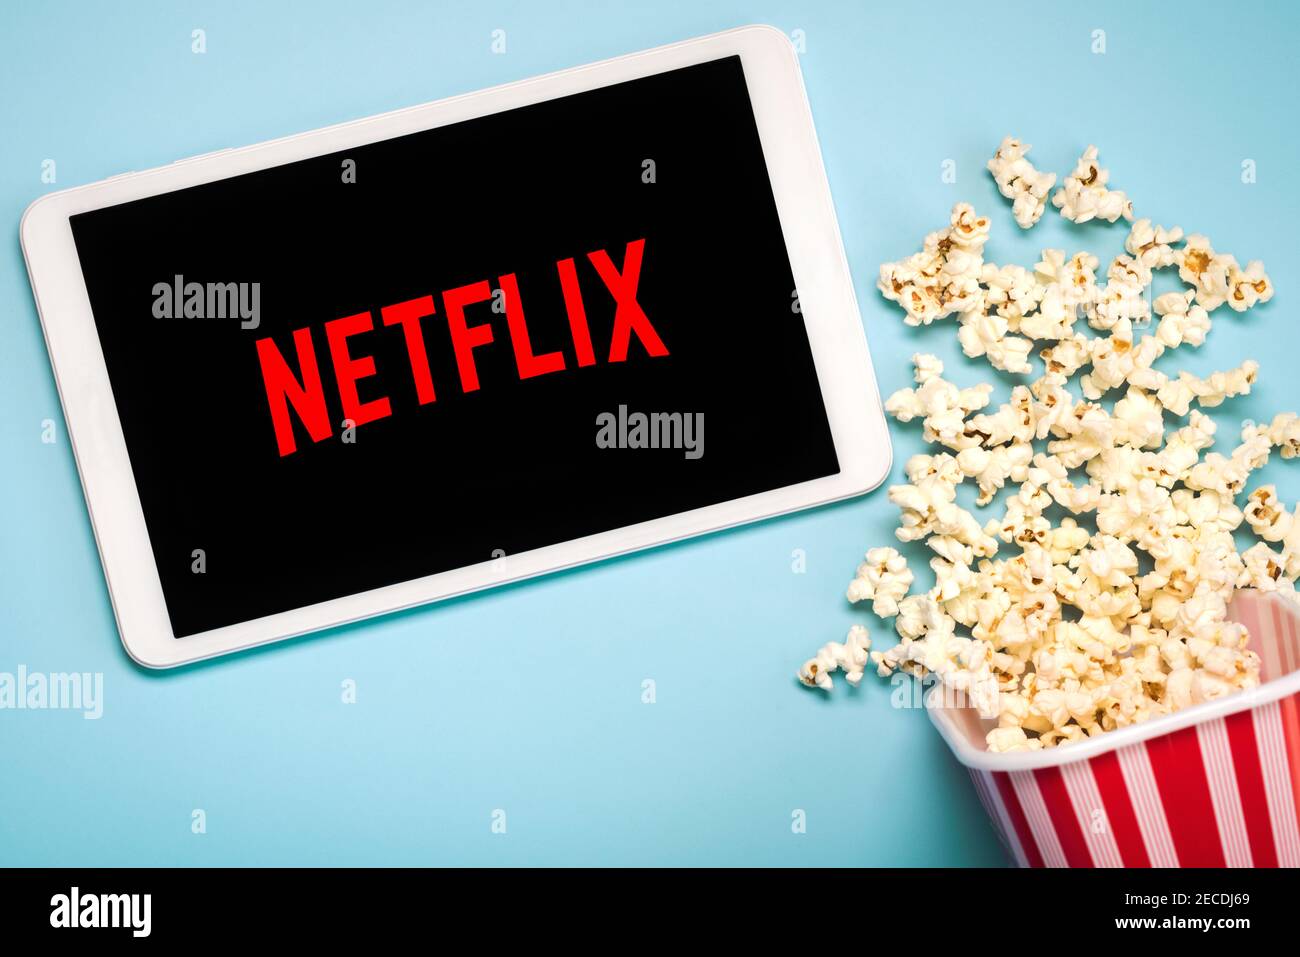 Netflix logo on the screen of a white digital tablet with popcorn on a blue background Stock Photo